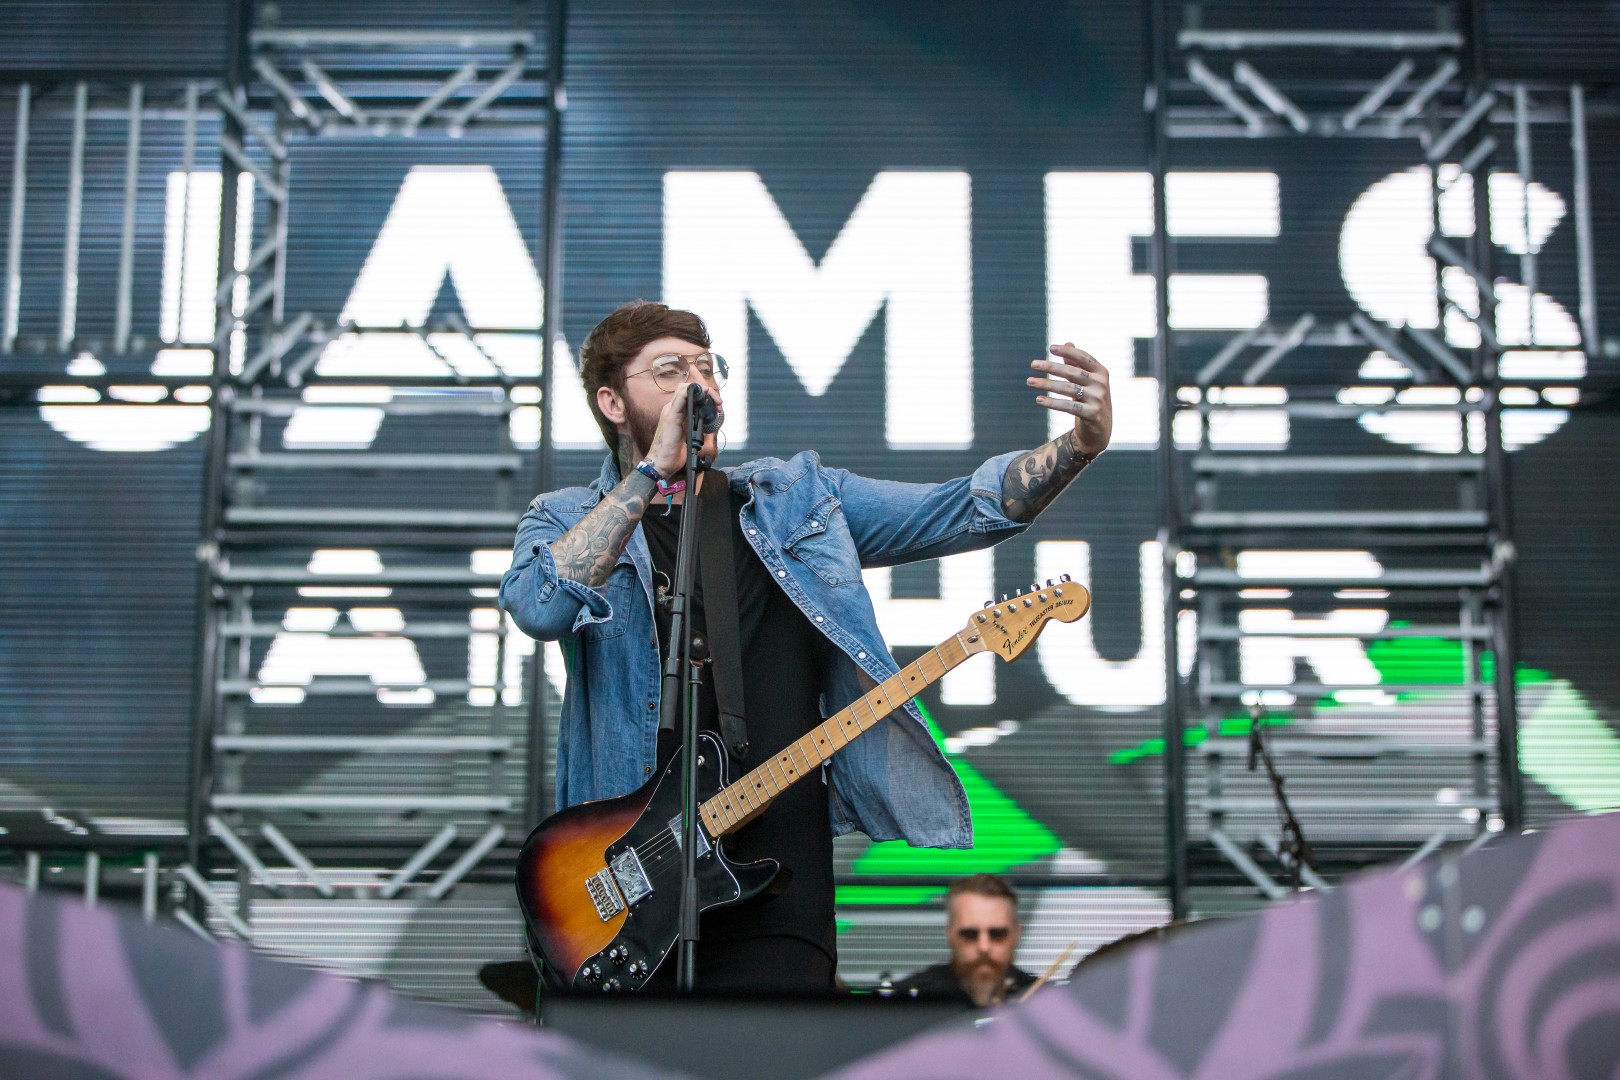 James Arthur at Cluj Arena in Cluj-Napoca on August 4, 2016 (d6b245f158)